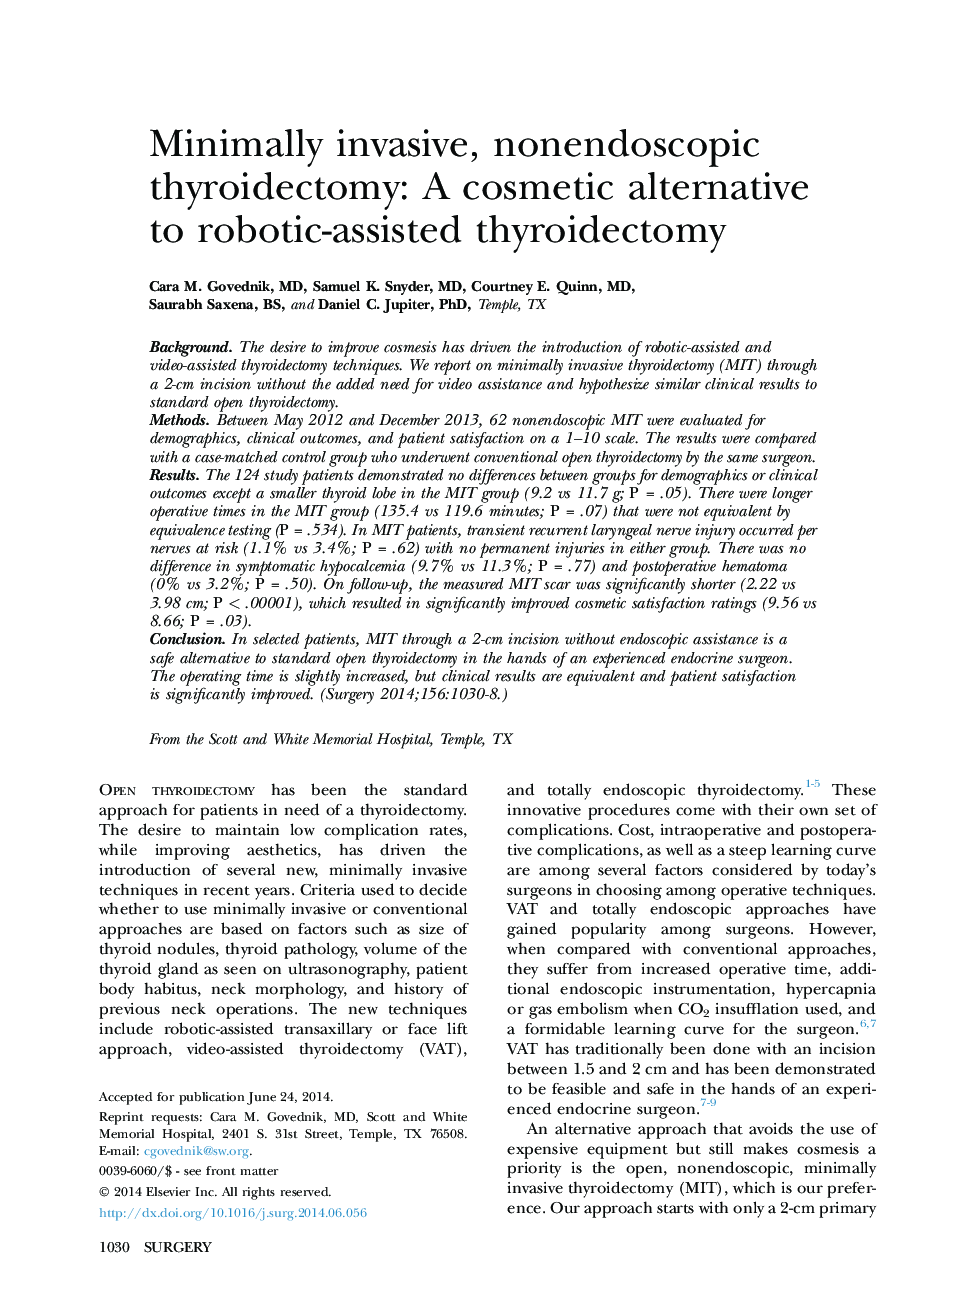 Minimally invasive, nonendoscopic thyroidectomy: A cosmetic alternative to robotic-assisted thyroidectomy